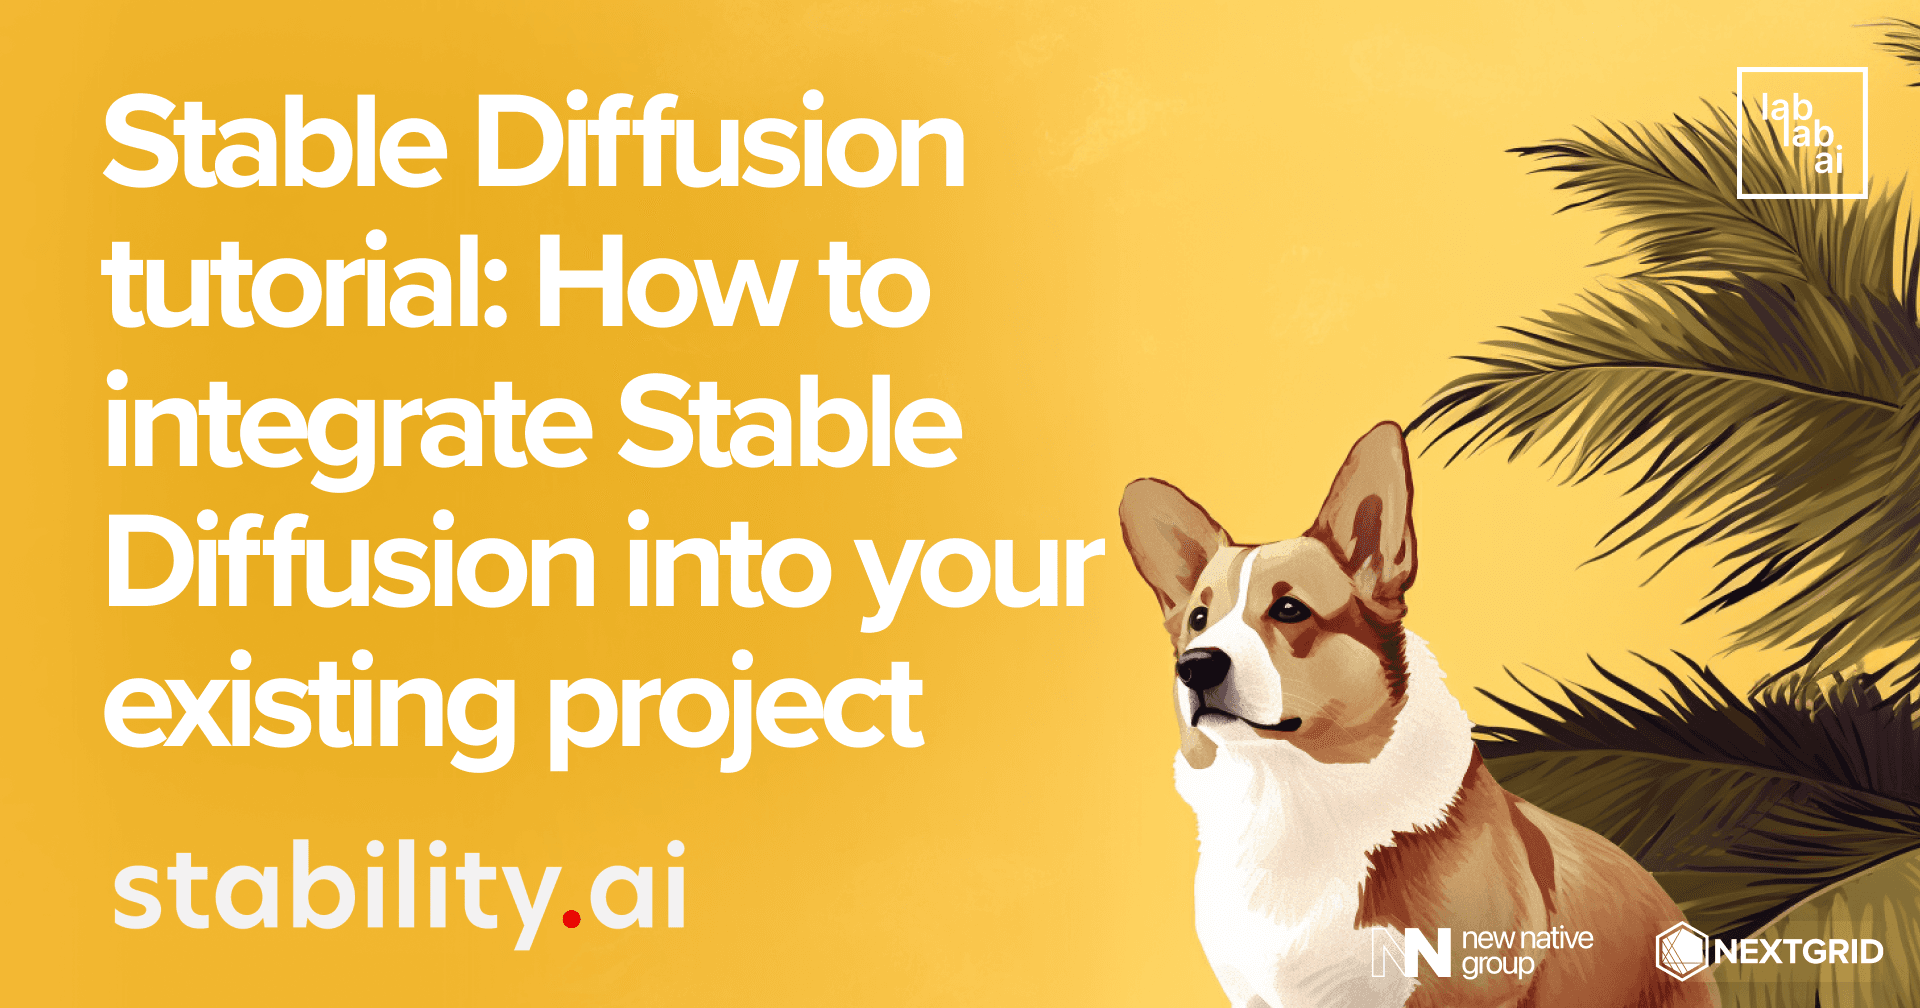 Stable Diffusion tutorial: How to integrate Stable Diffusion into your existing project